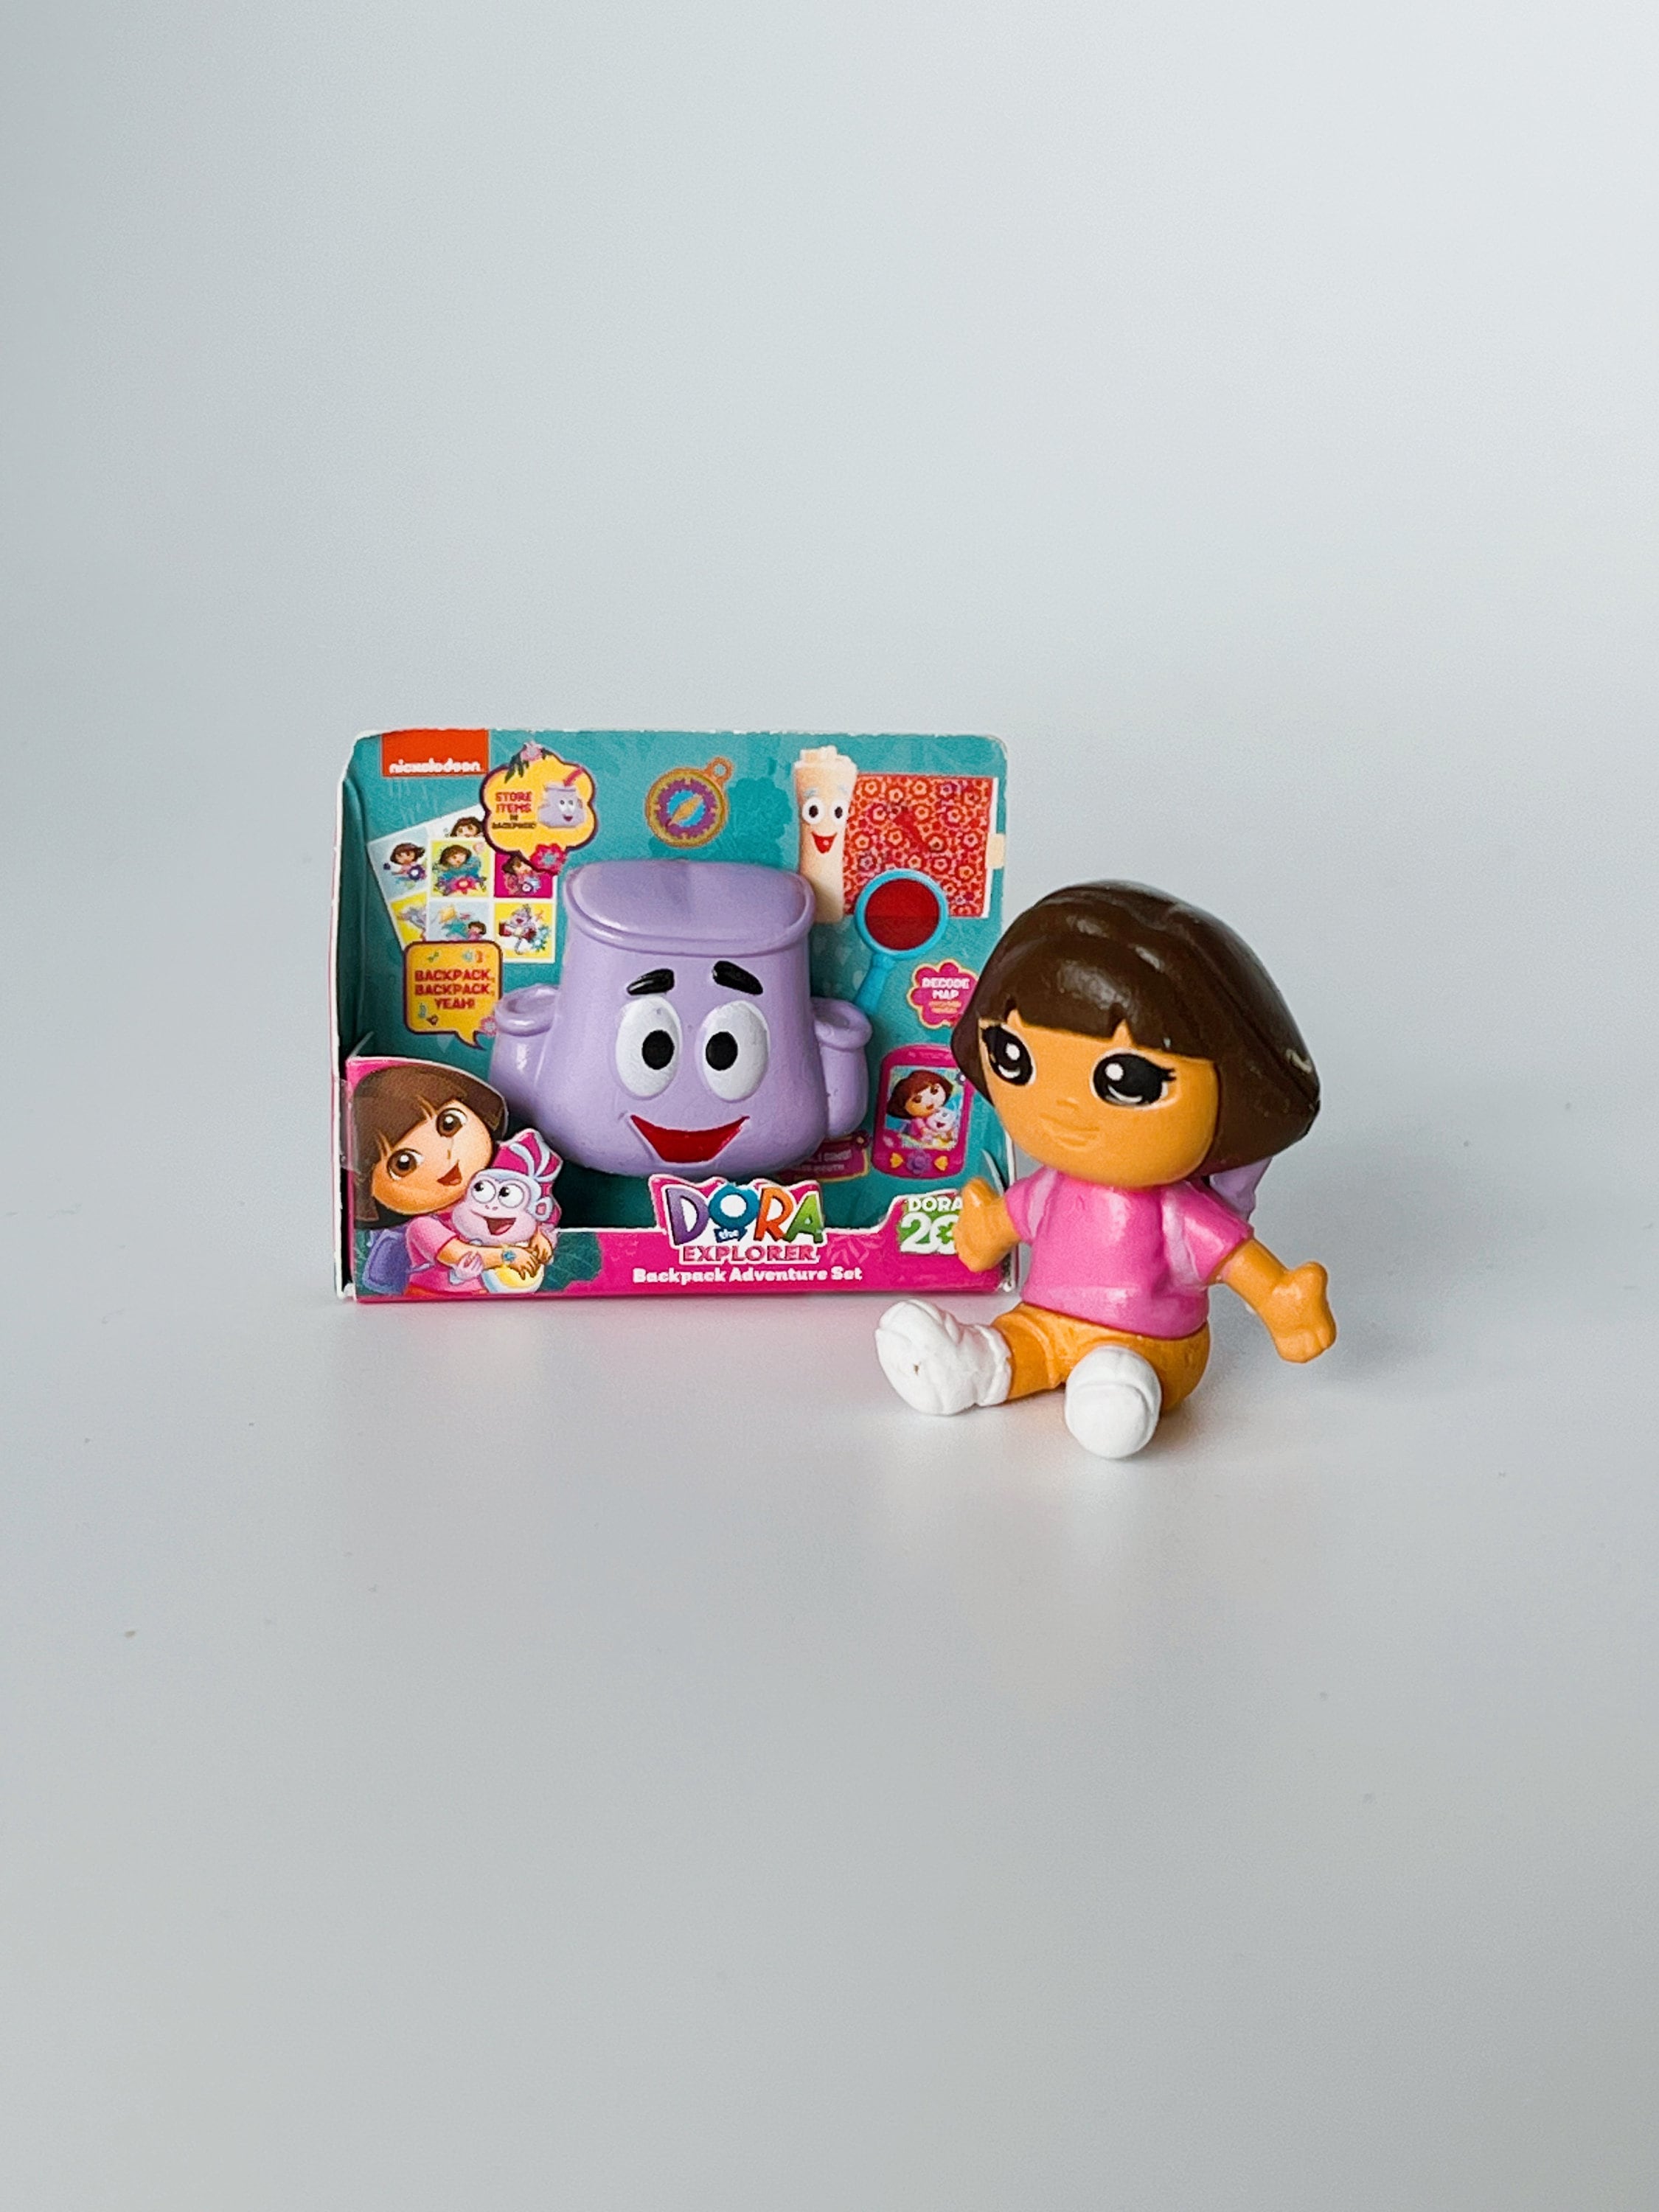 Dora the Explorer Backpack and Map Goody Bags | Nickelodeon Parents